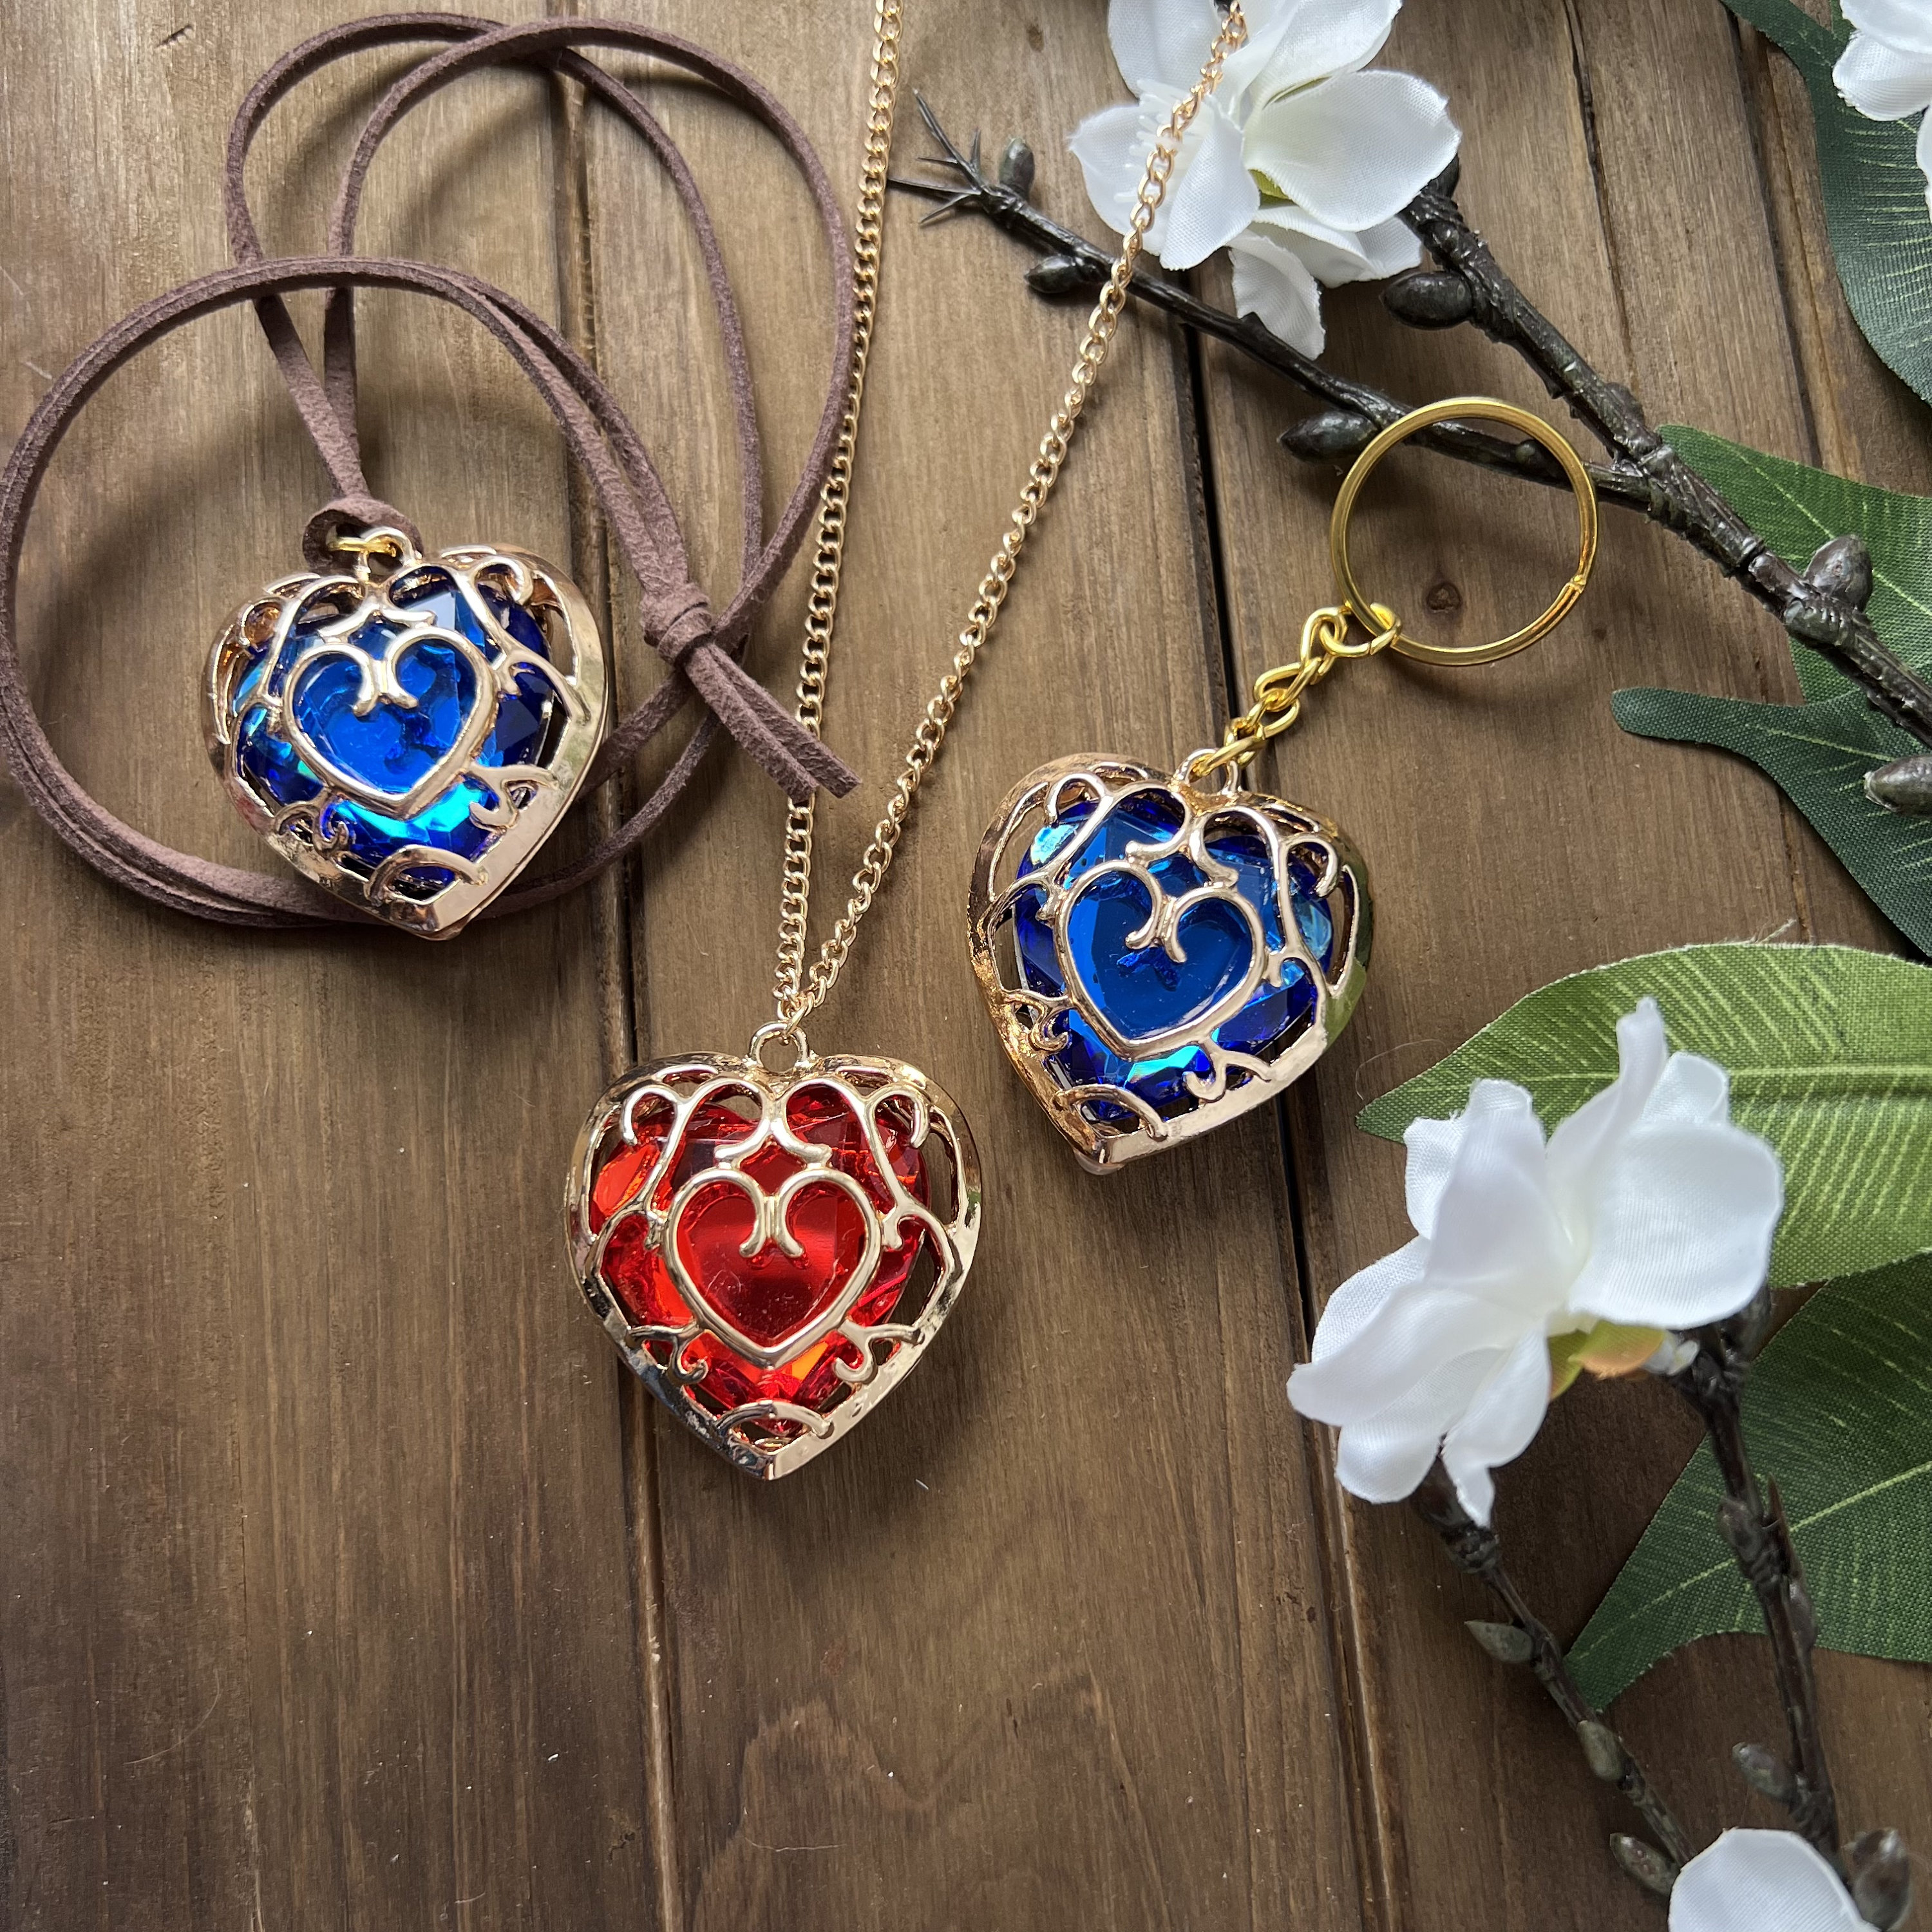 Zelda Gold/Silver Rupee Necklaces - Shut Up And Take My Yen